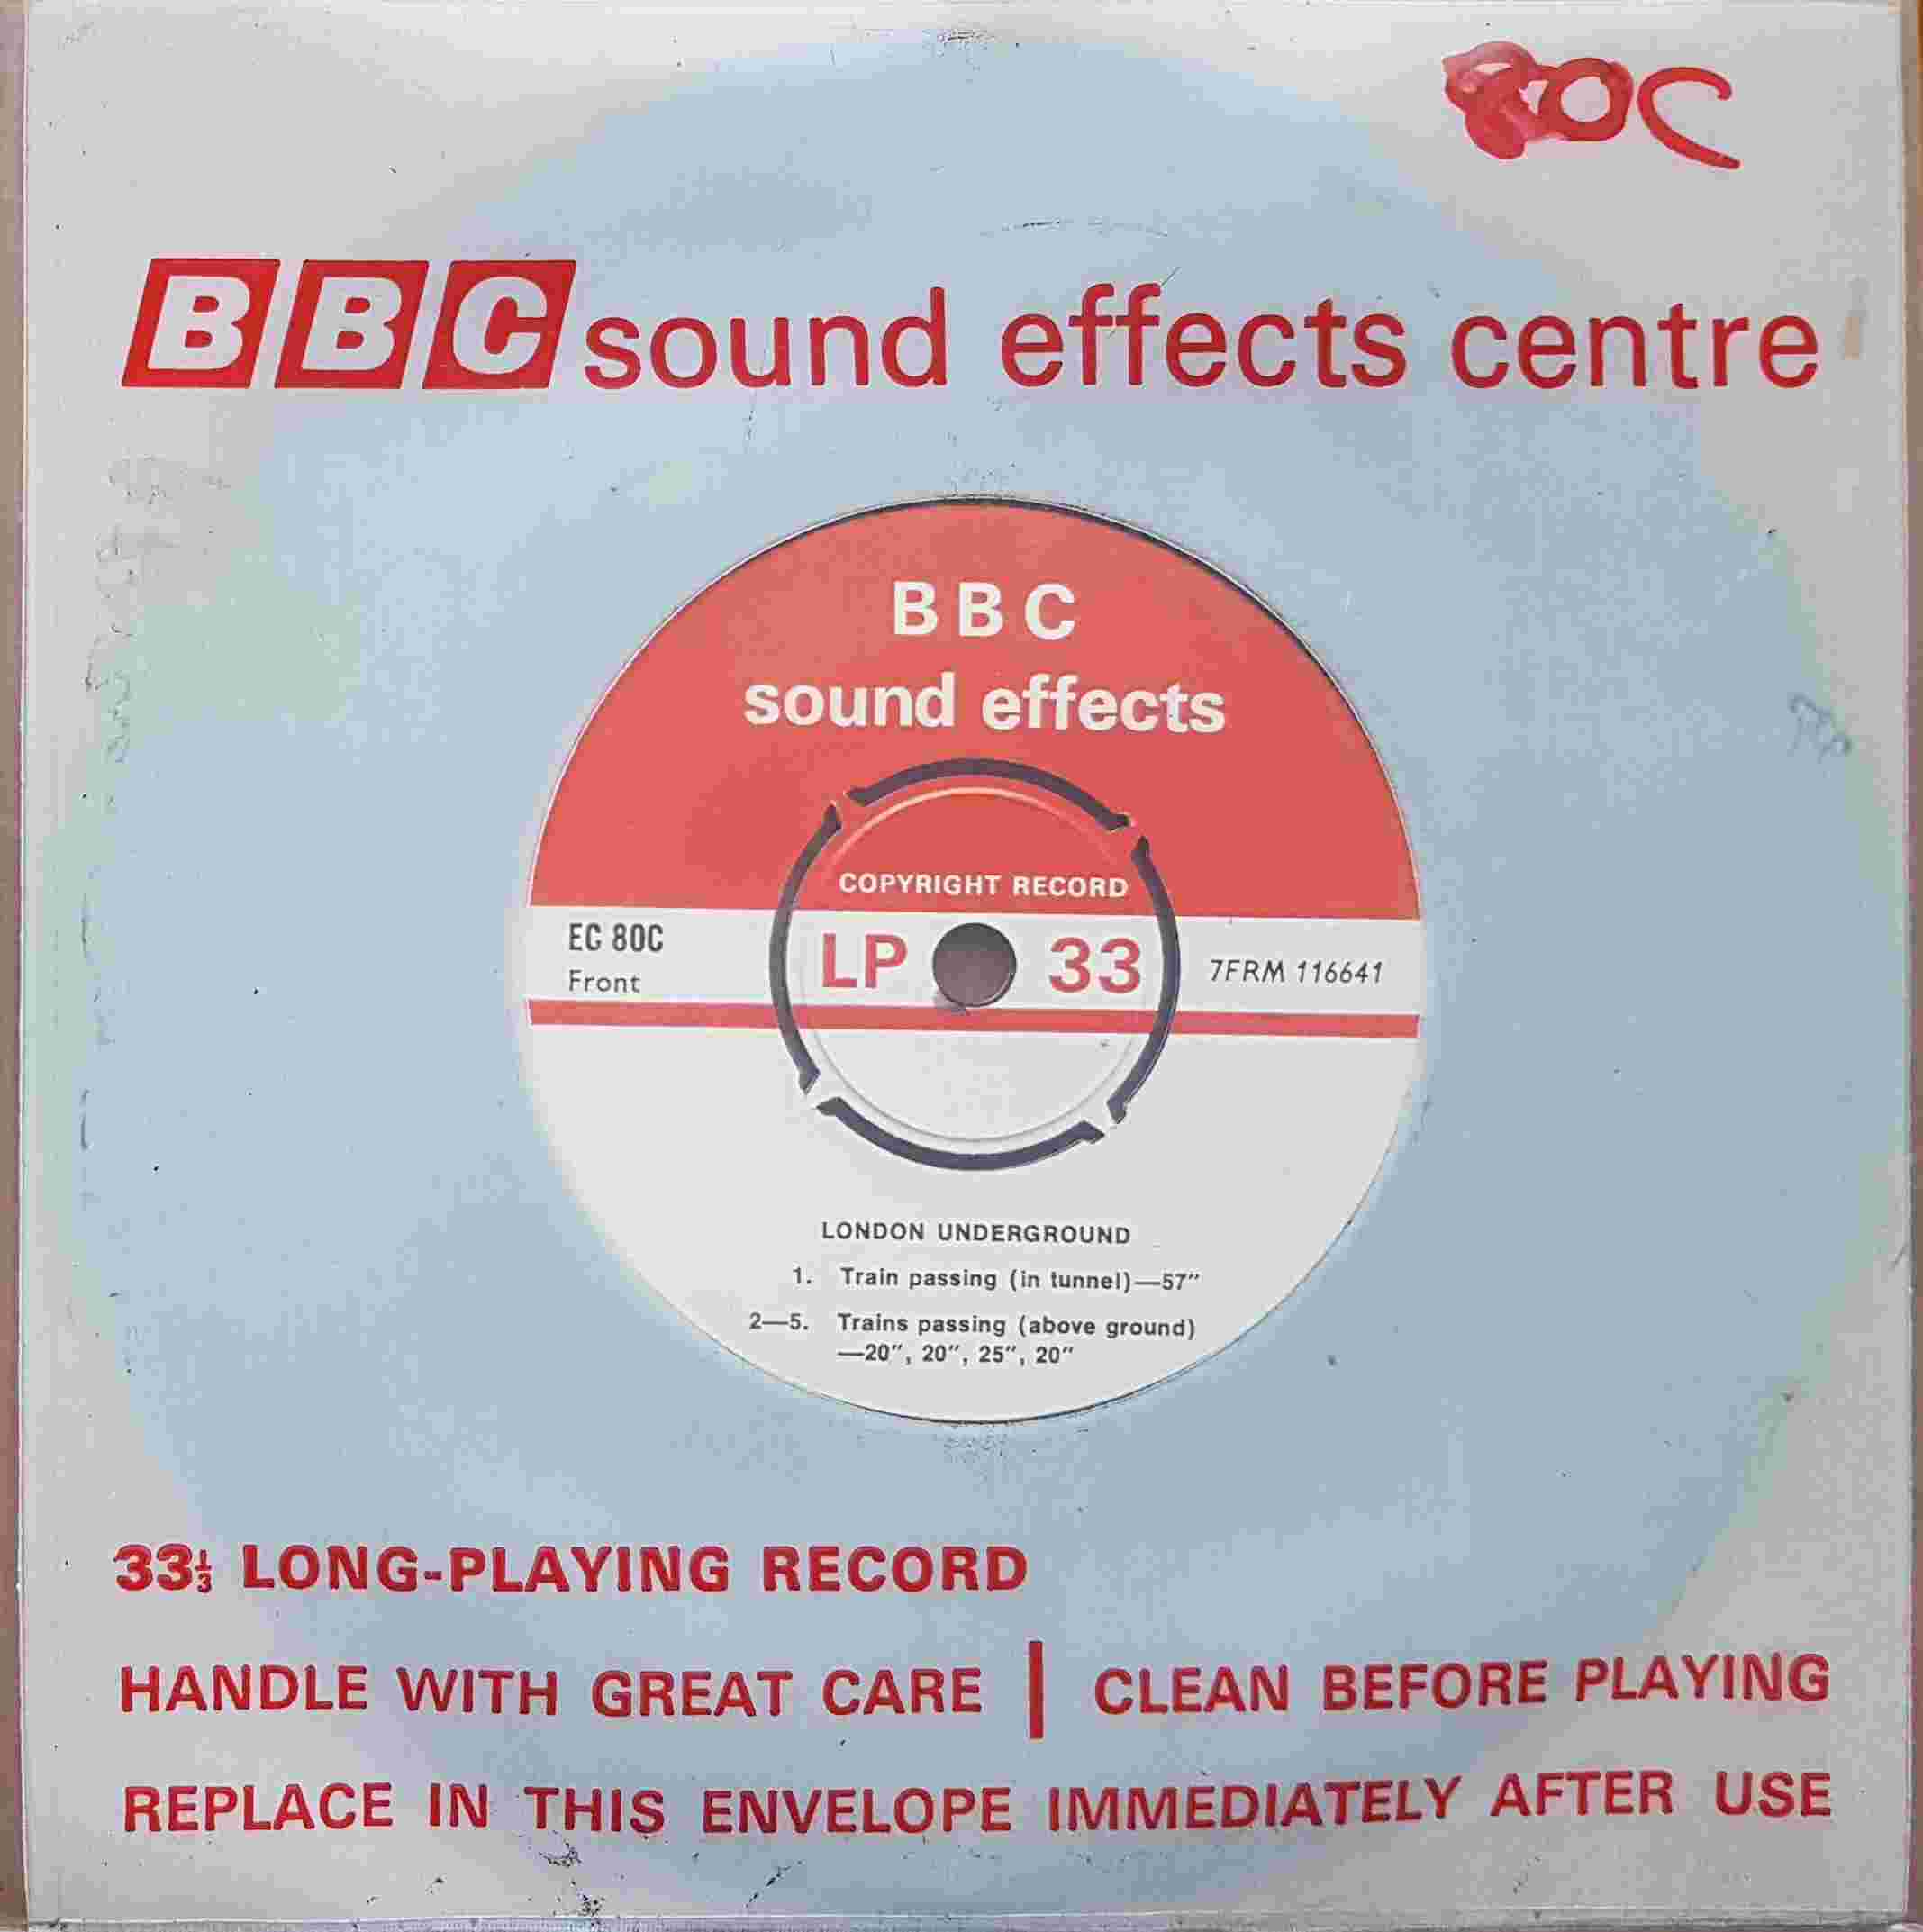 Picture of EC 80C London Underground by artist Not registered from the BBC records and Tapes library